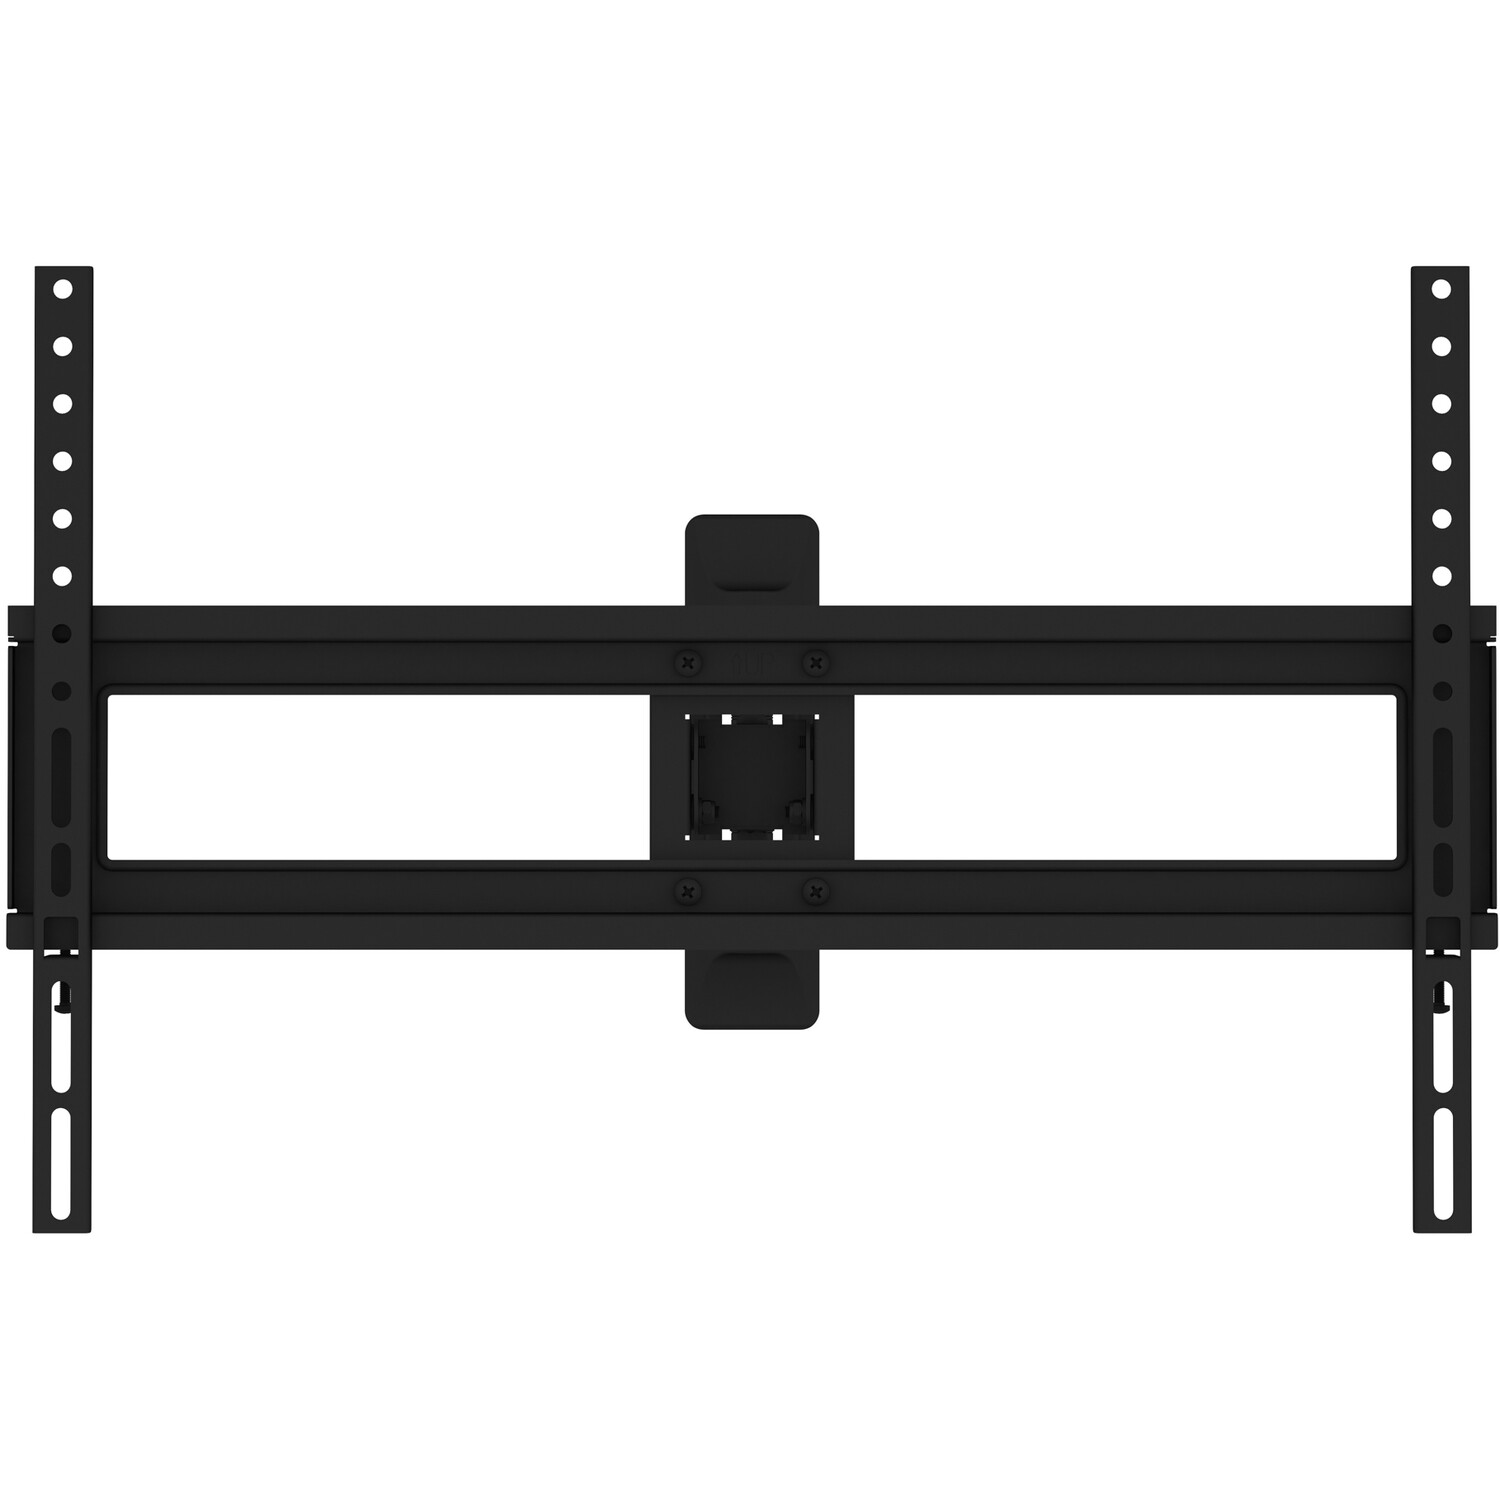 37 to 80 inch Multi-Position Black TV Mount Image 1